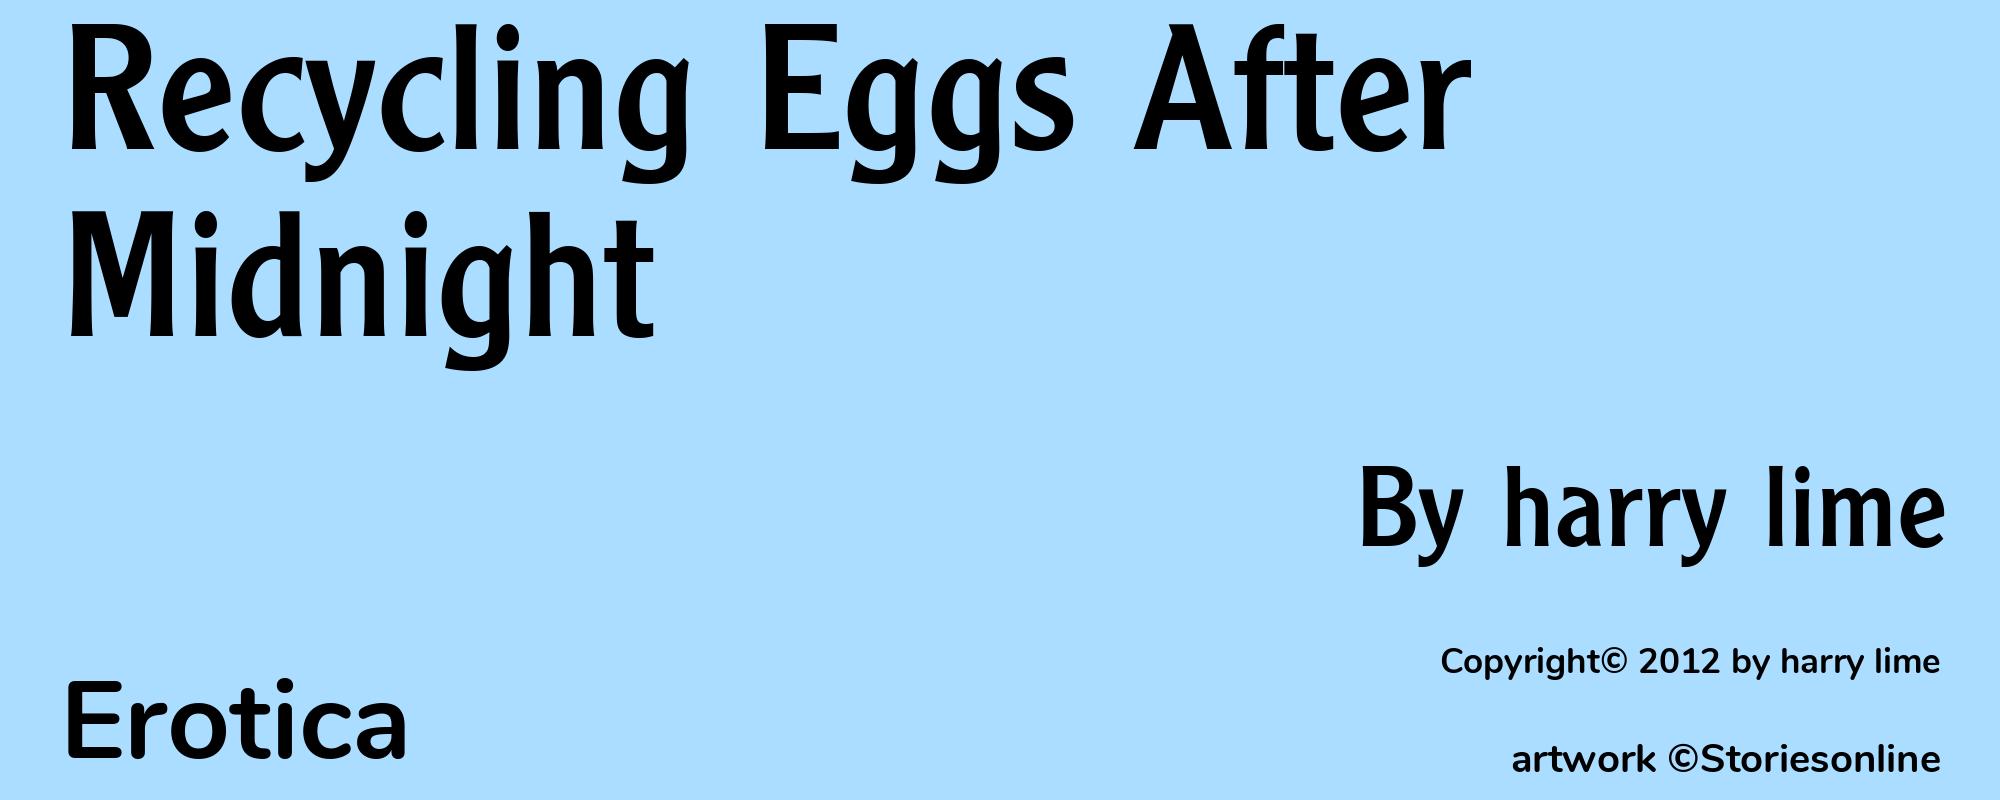 Recycling Eggs After Midnight - Cover